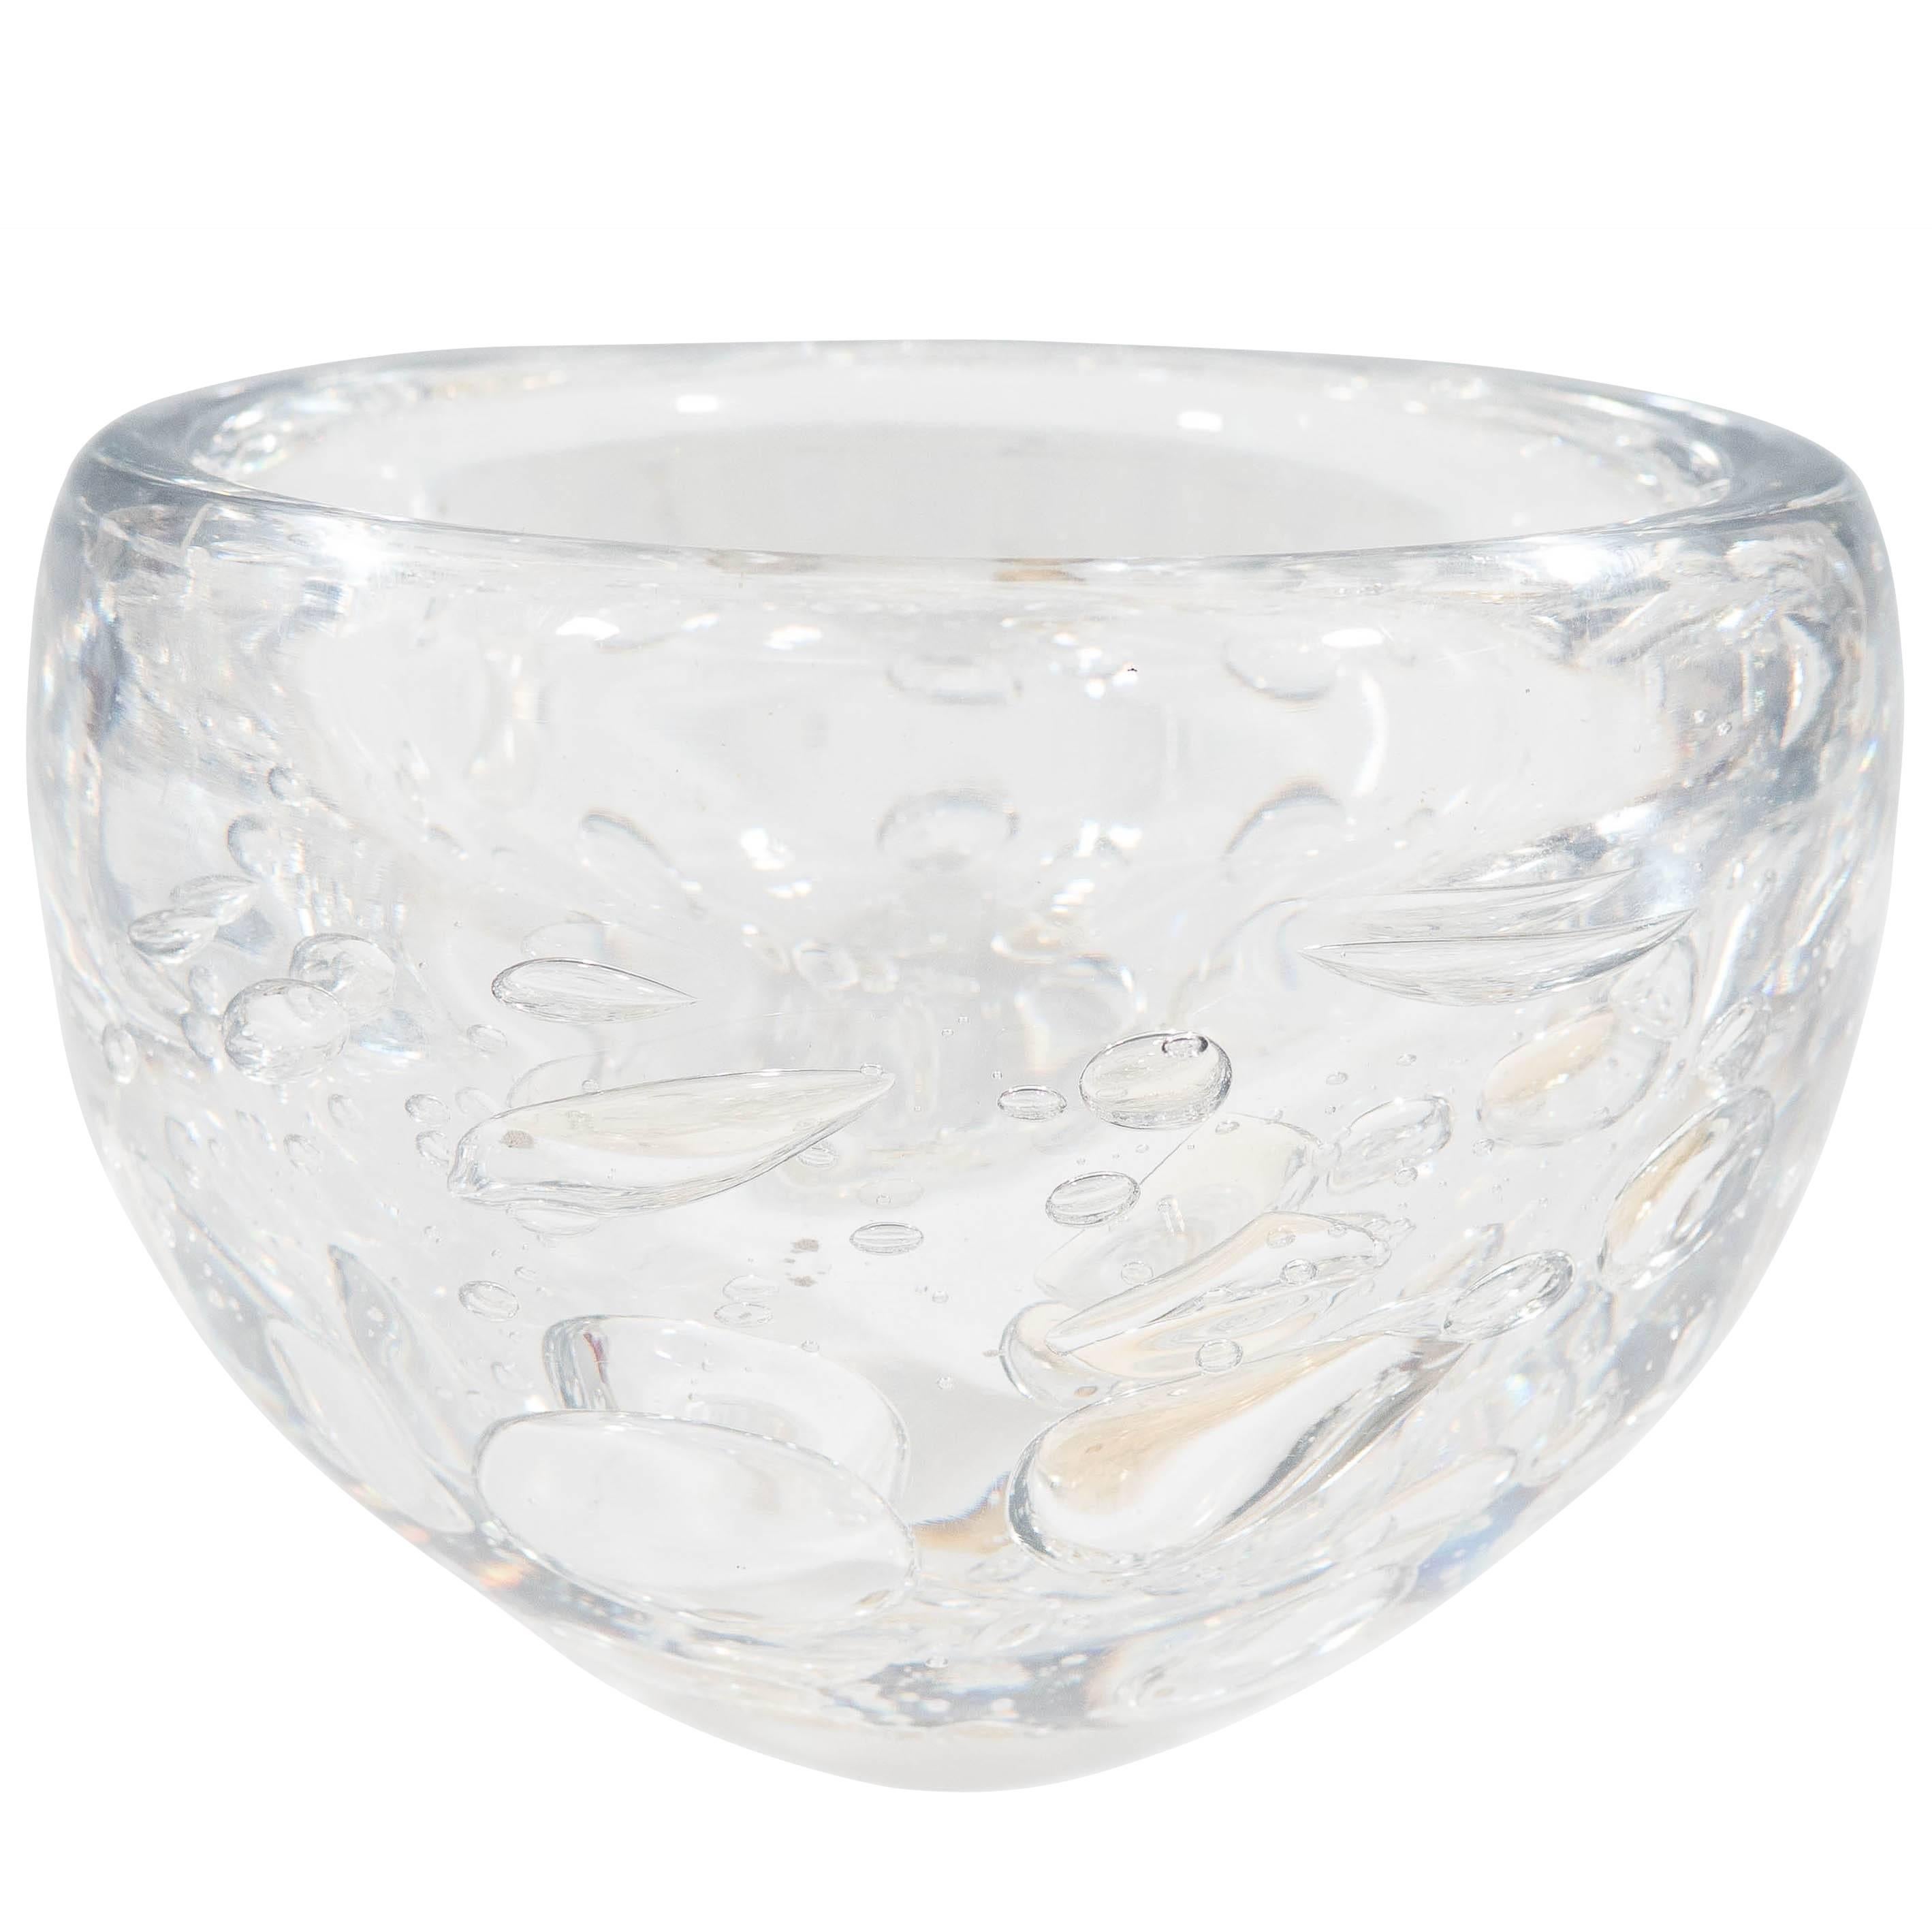 Kosta Decorative Glass Bowl with Controlled Bubbles